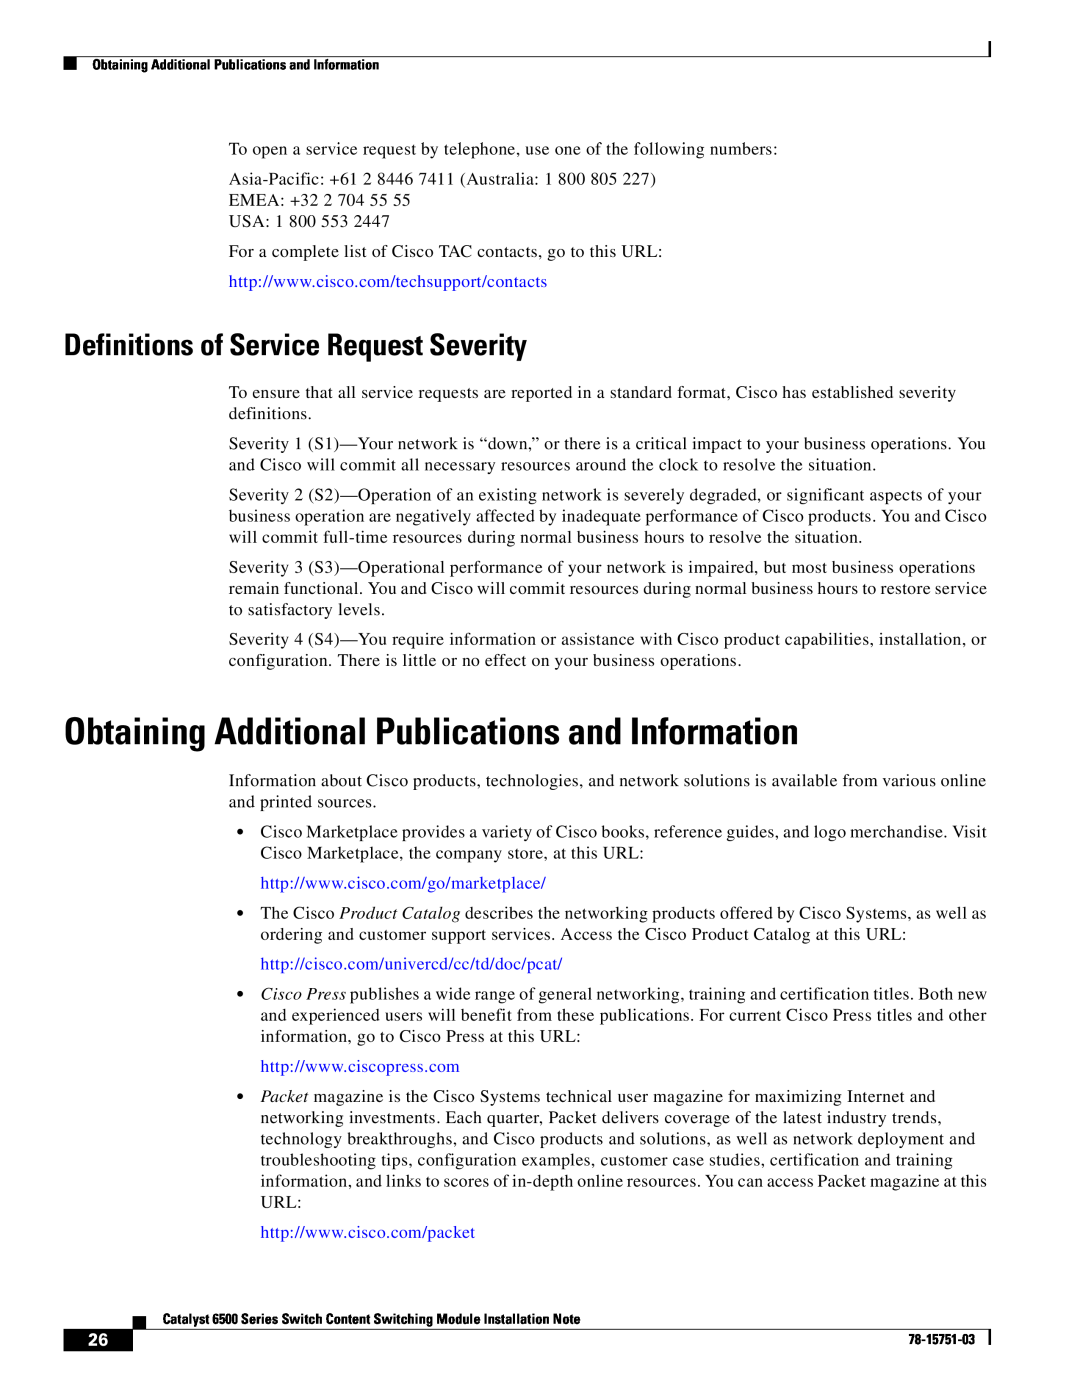 Cisco Systems WS-X6066-SLB-APC Obtaining Additional Publications and Information, Definitions of Service Request Severity 